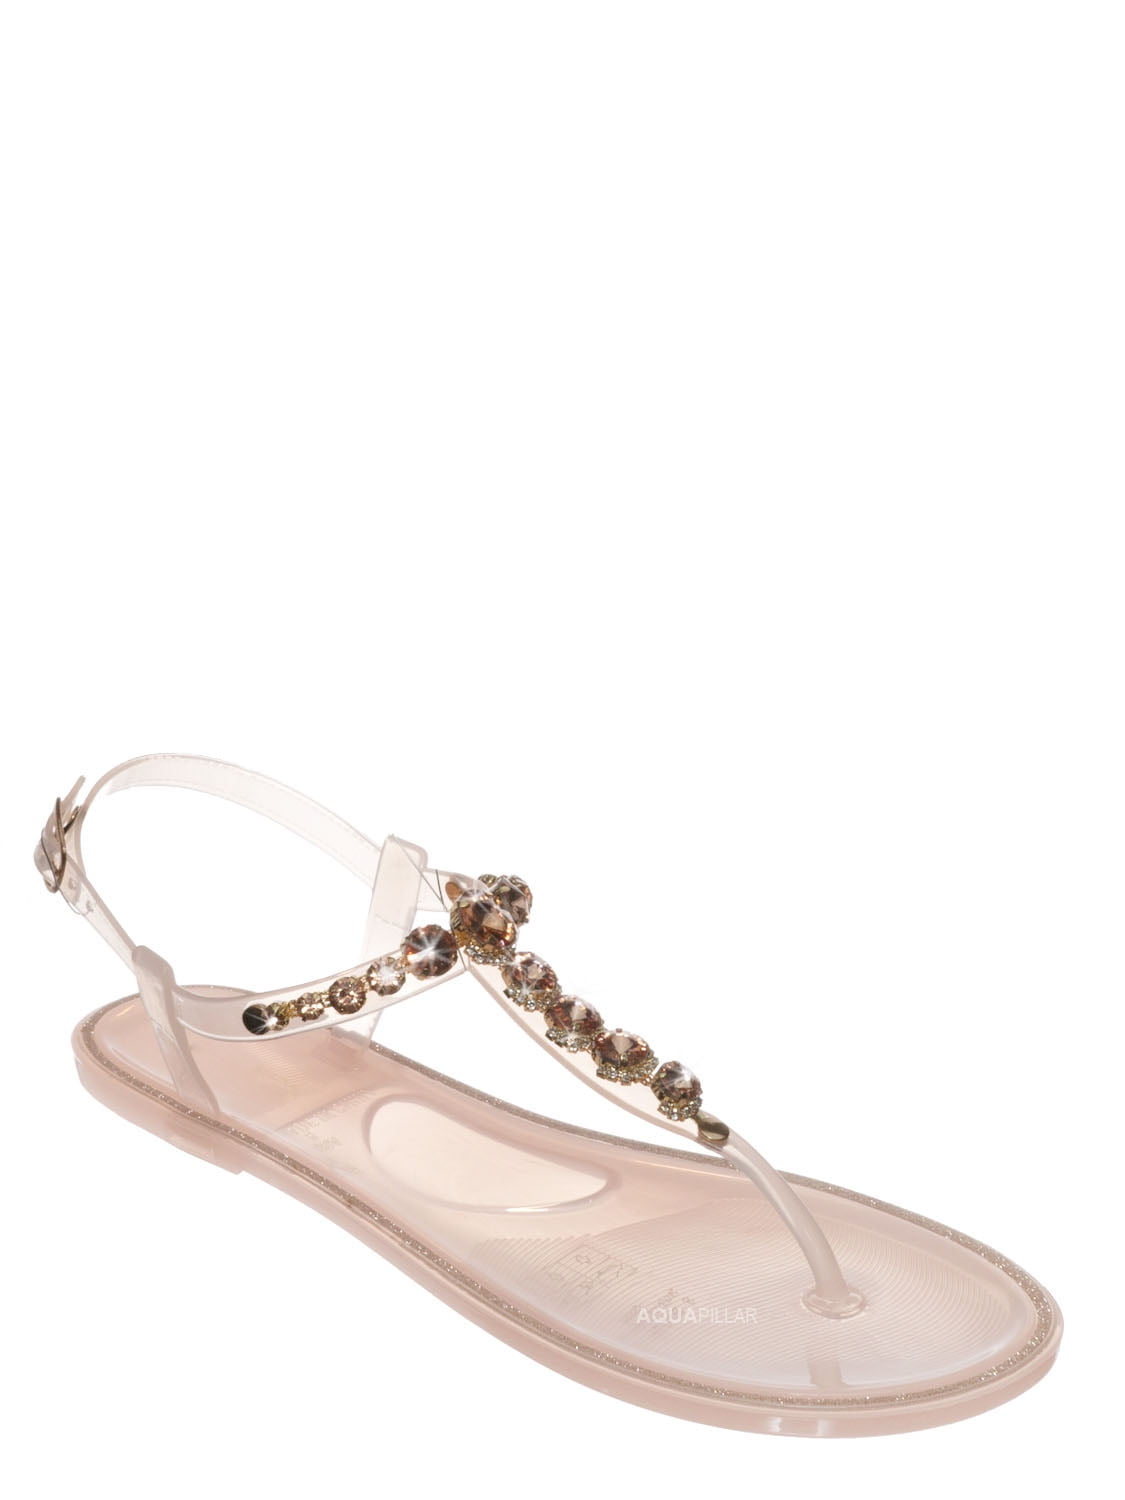 Bamboo - Gather06 by Bamboo, Jewel Lucite Jelly Flat Sandal - Clear ...